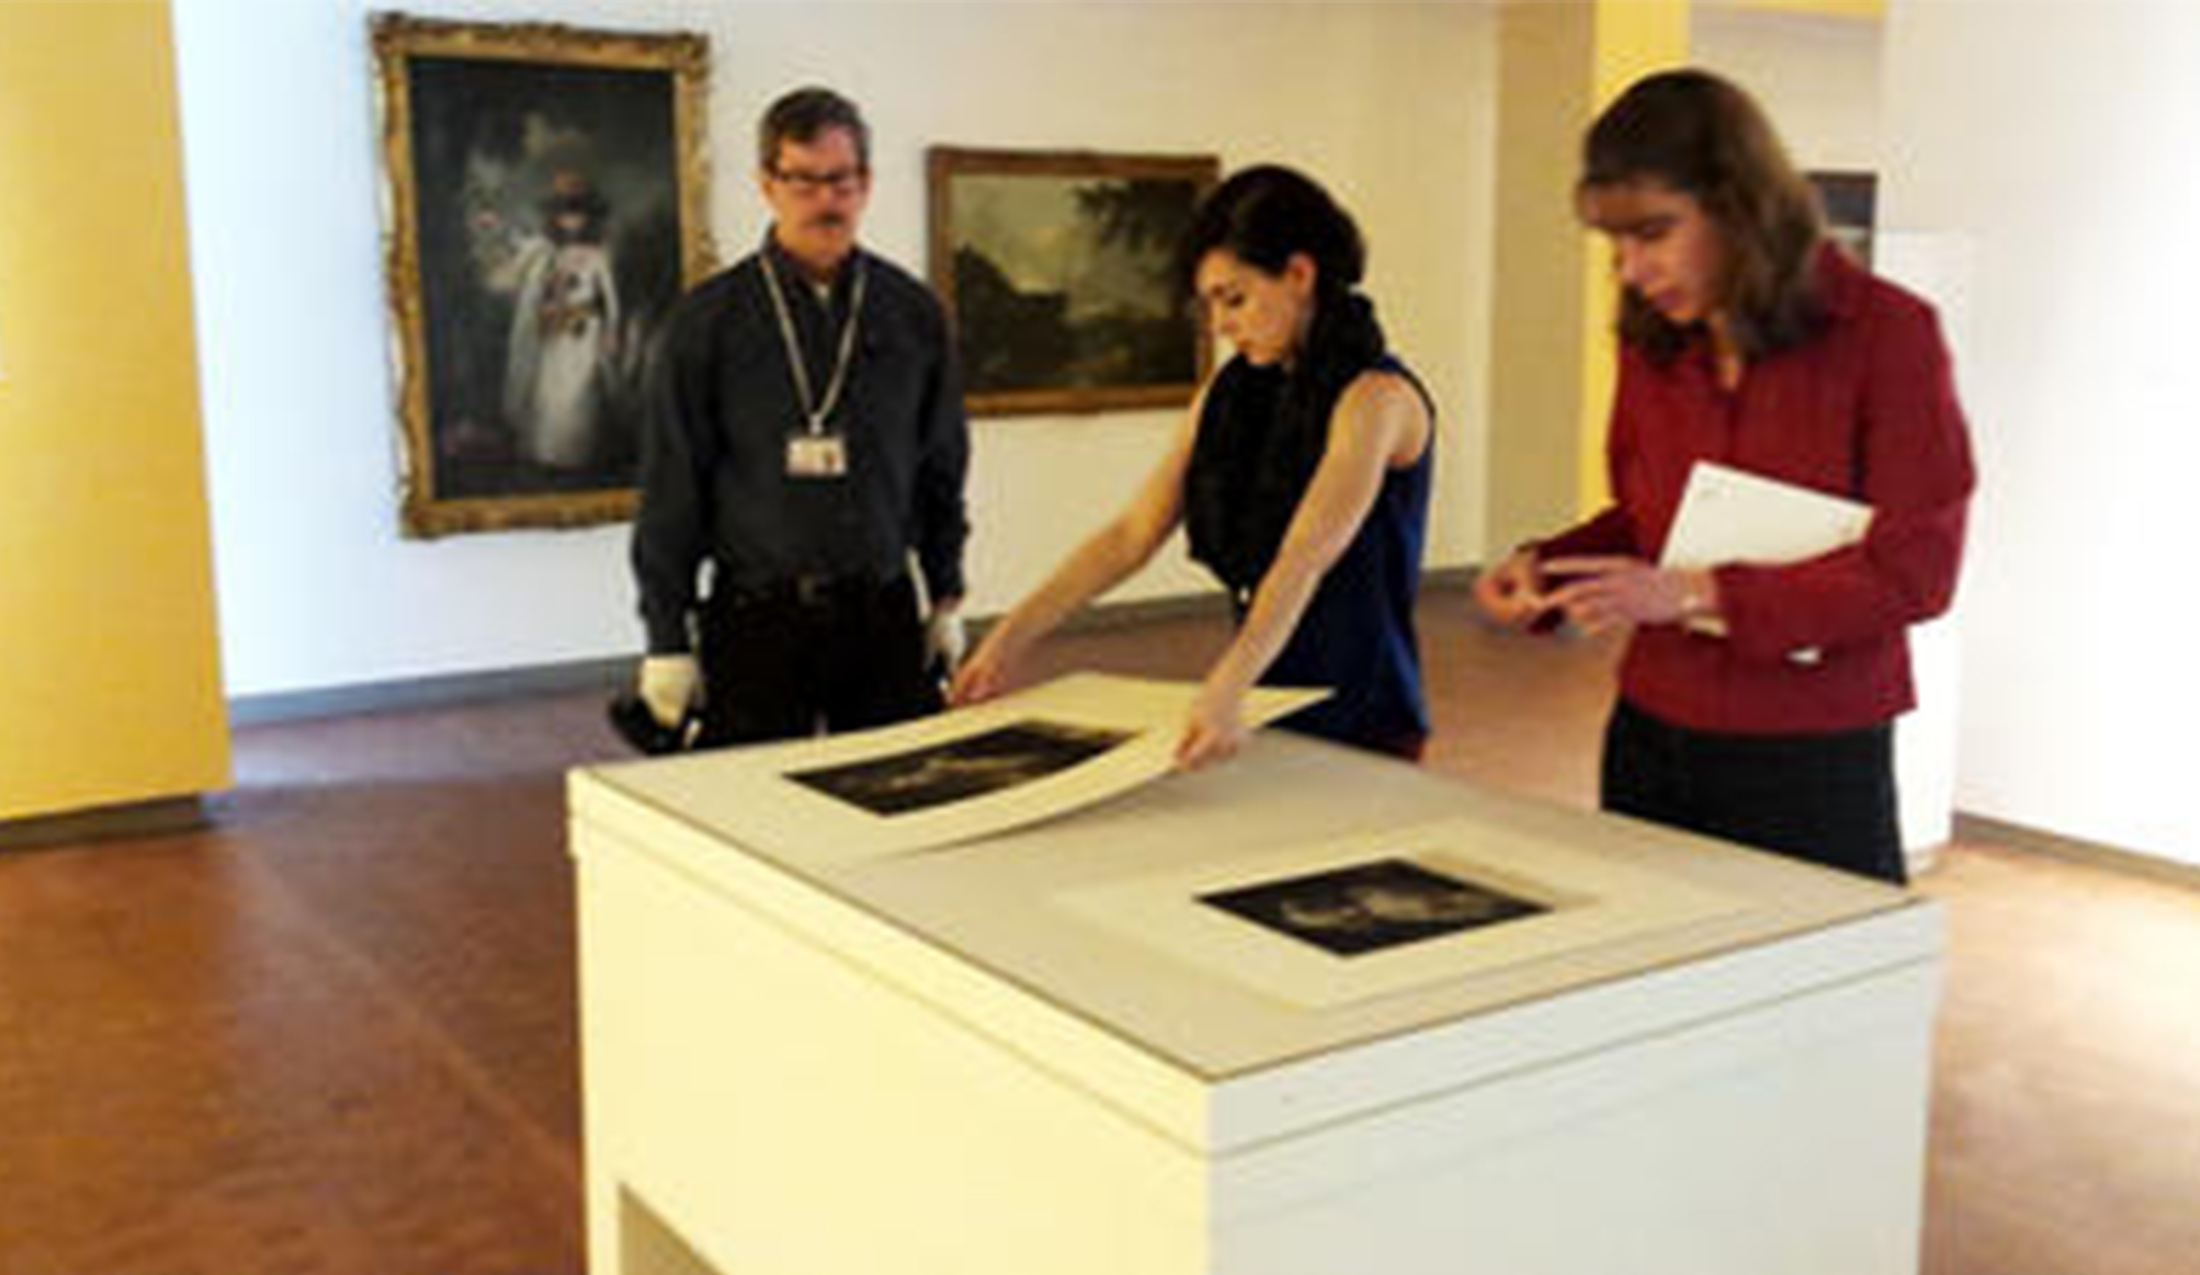 girl stands in an art gallery, placing a print onto the top of a cabinet. a man stands to her right and a woman stands to her left, both watching her work.